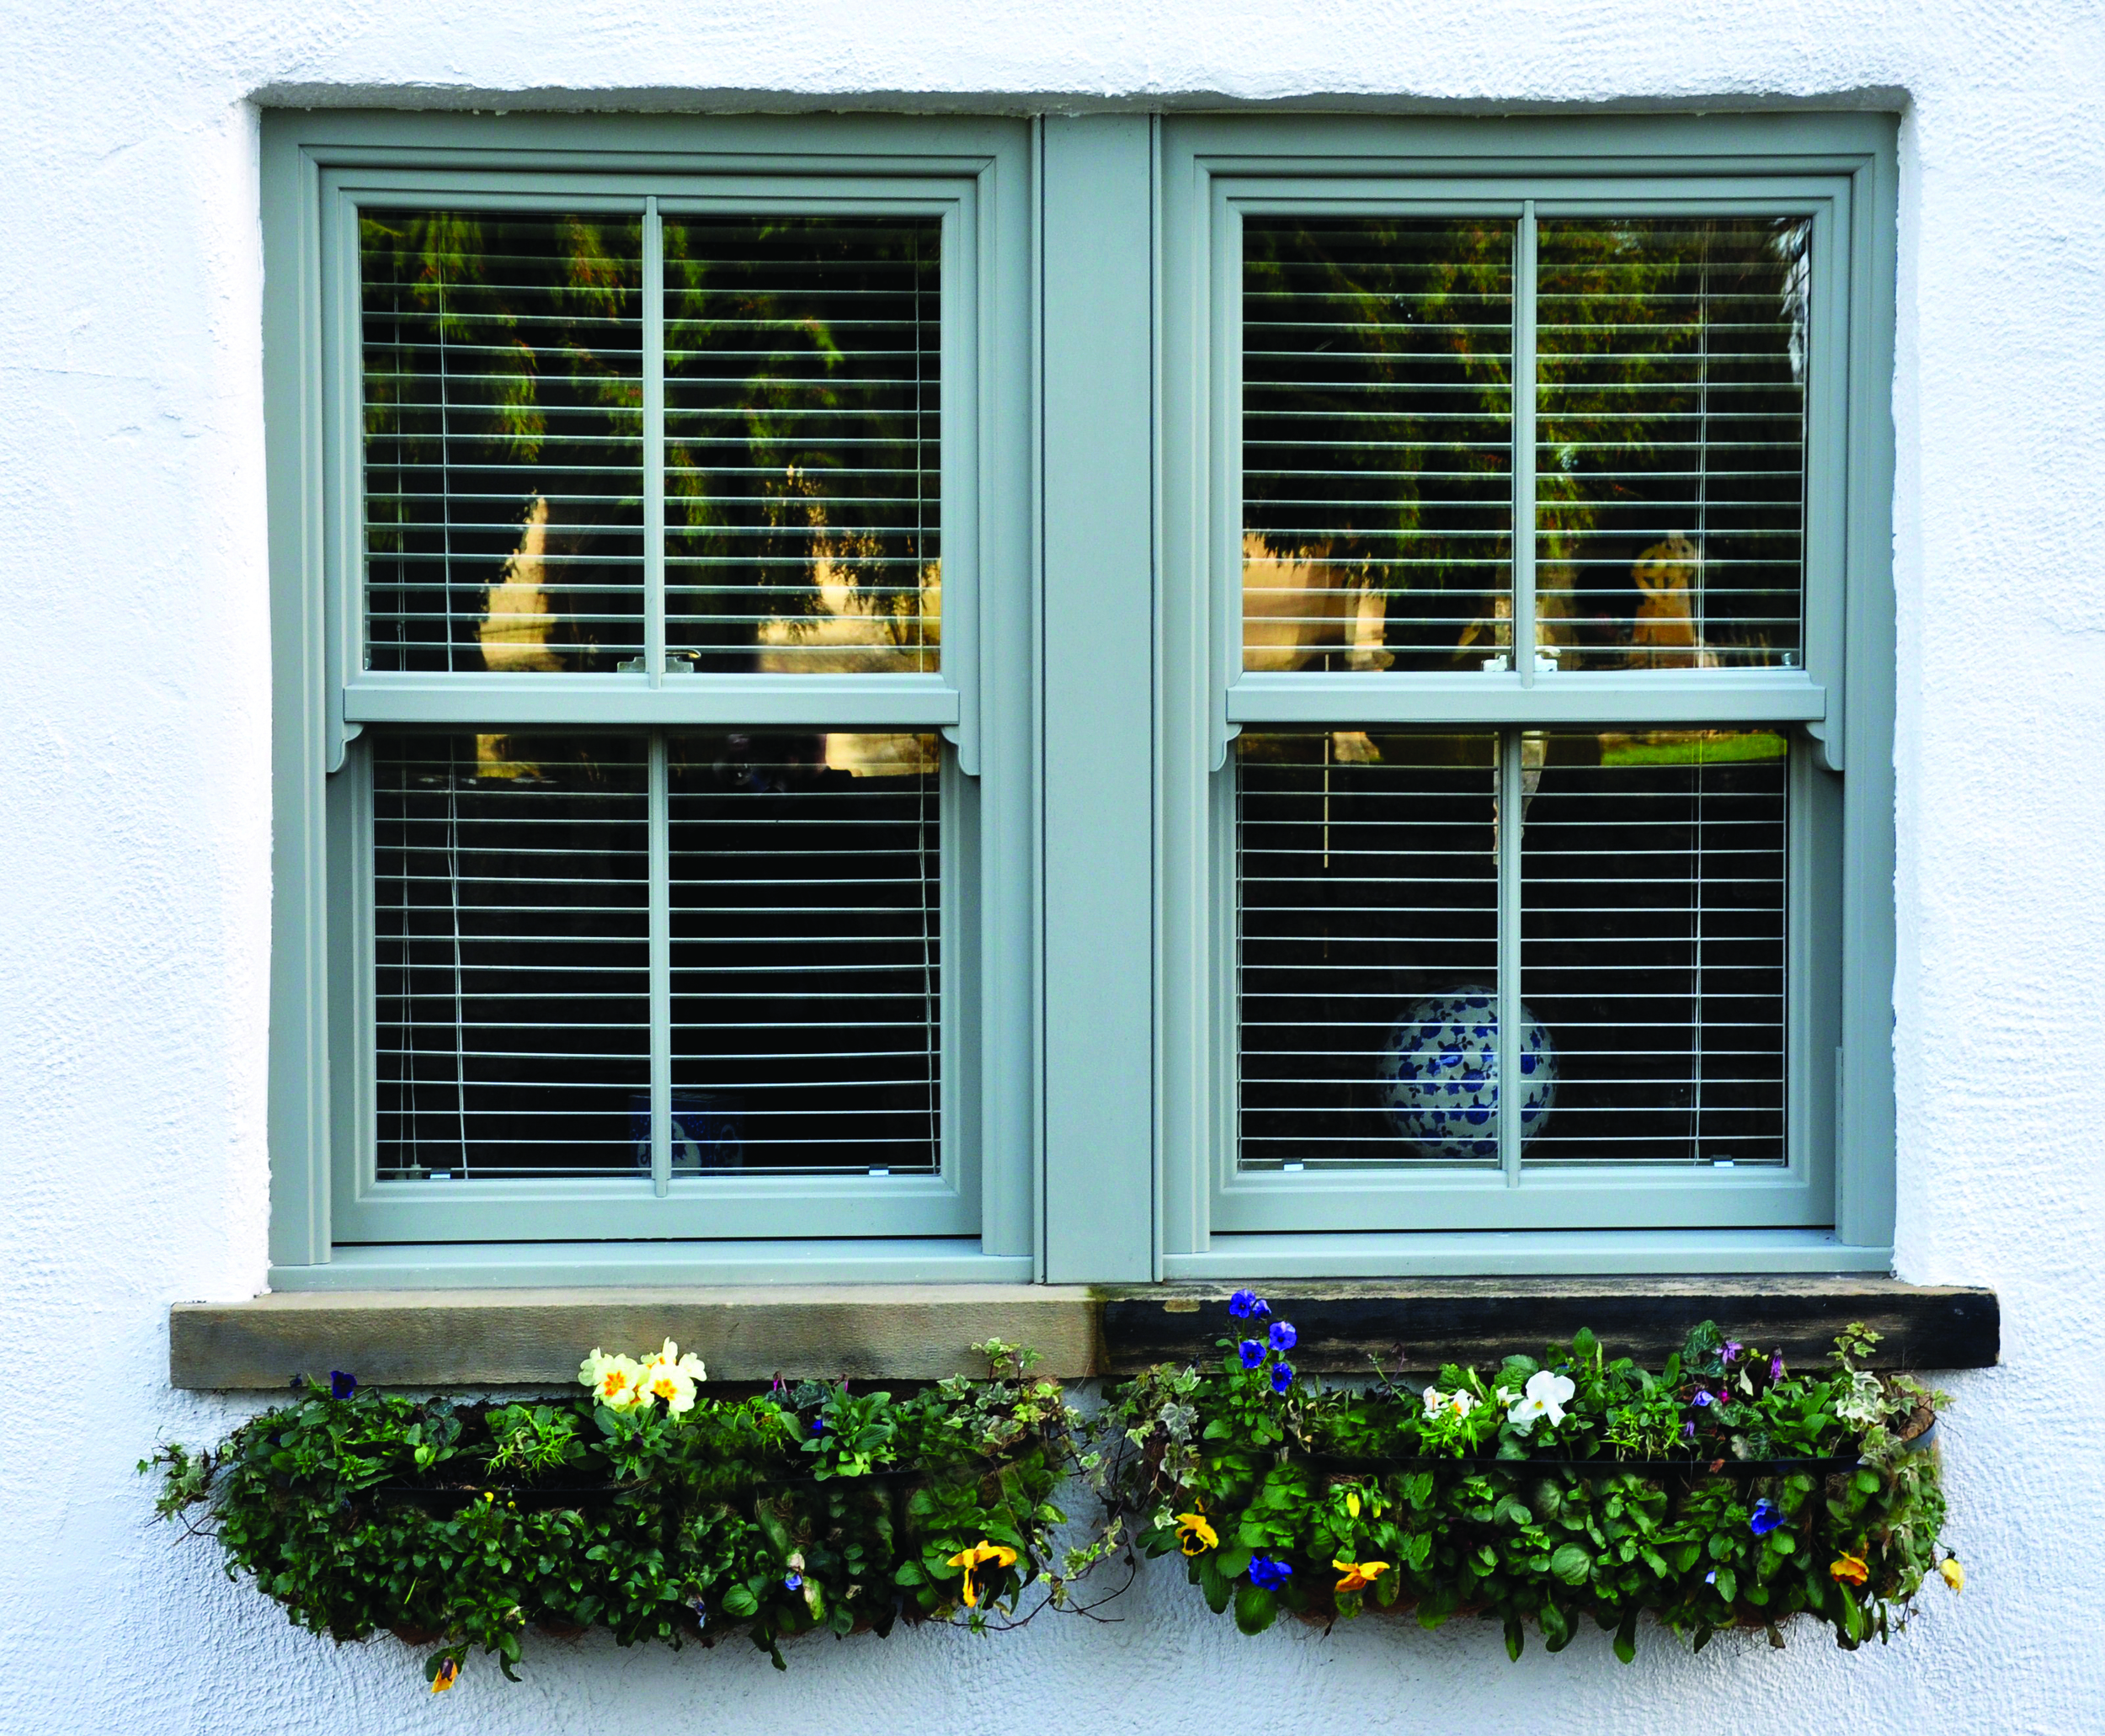   Windows   Our windows are available in energy efficient PVCu and aluminium, in a range of styles and colours to suit your home  Freephone 0800 881 5640   Learn more  